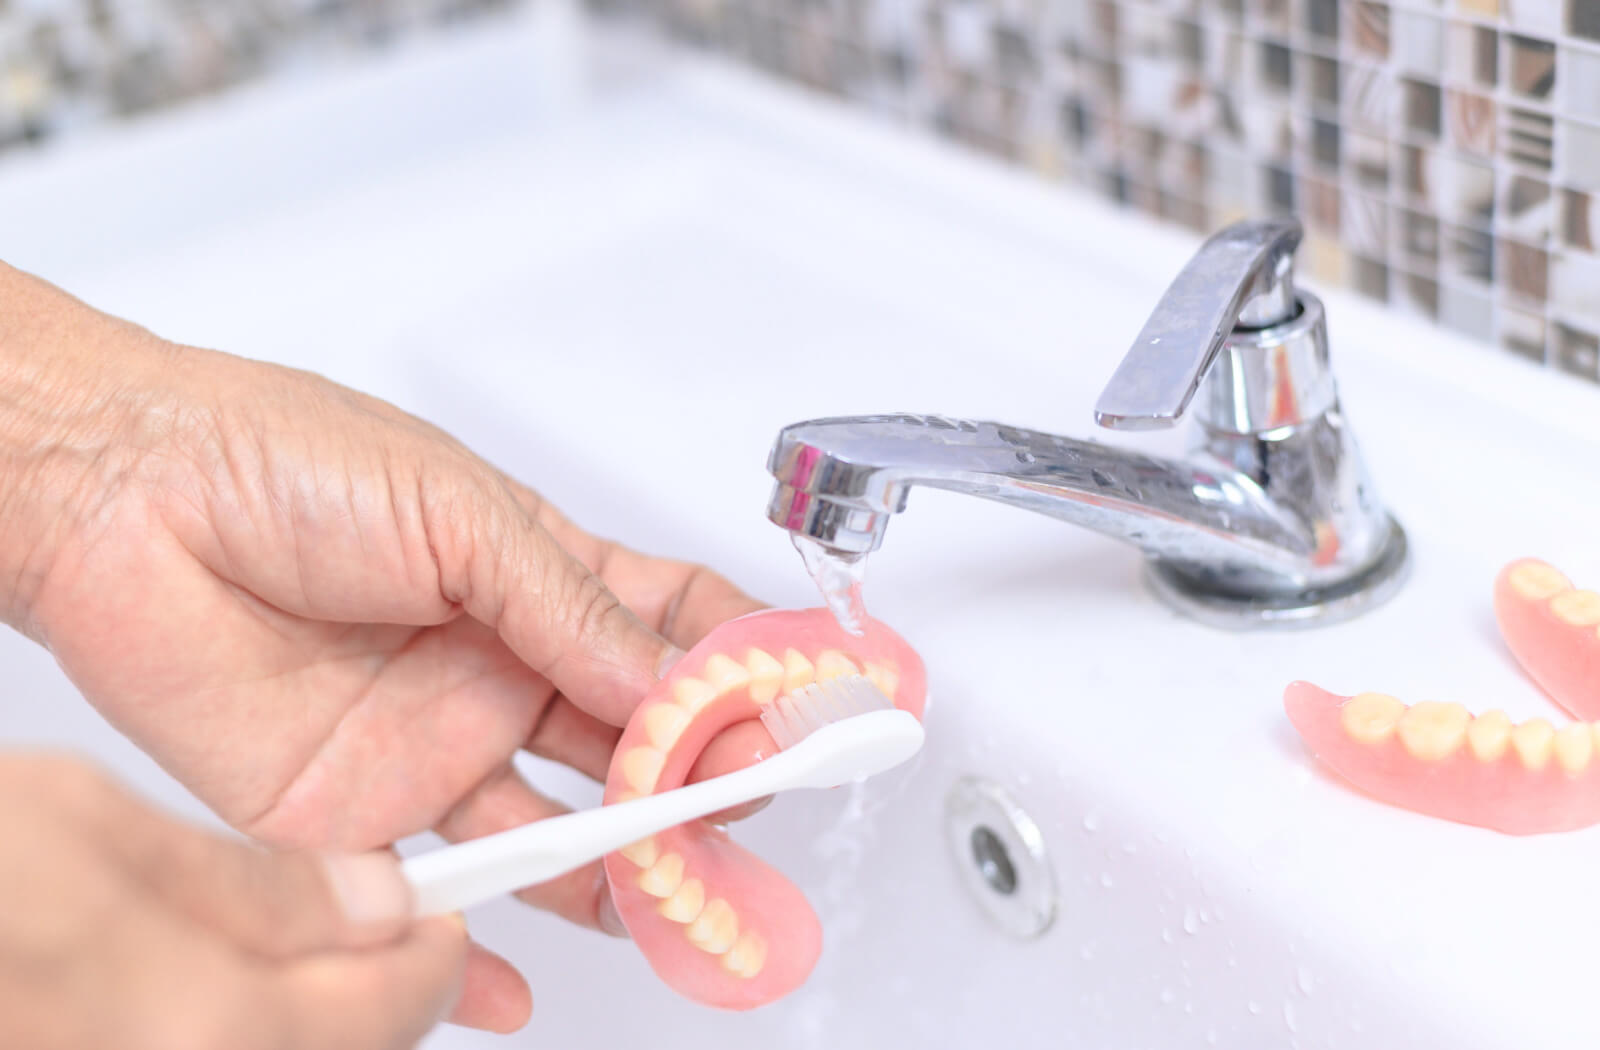 A close-up of senior person's hands using a soft-bristle brush to clean their dentures.